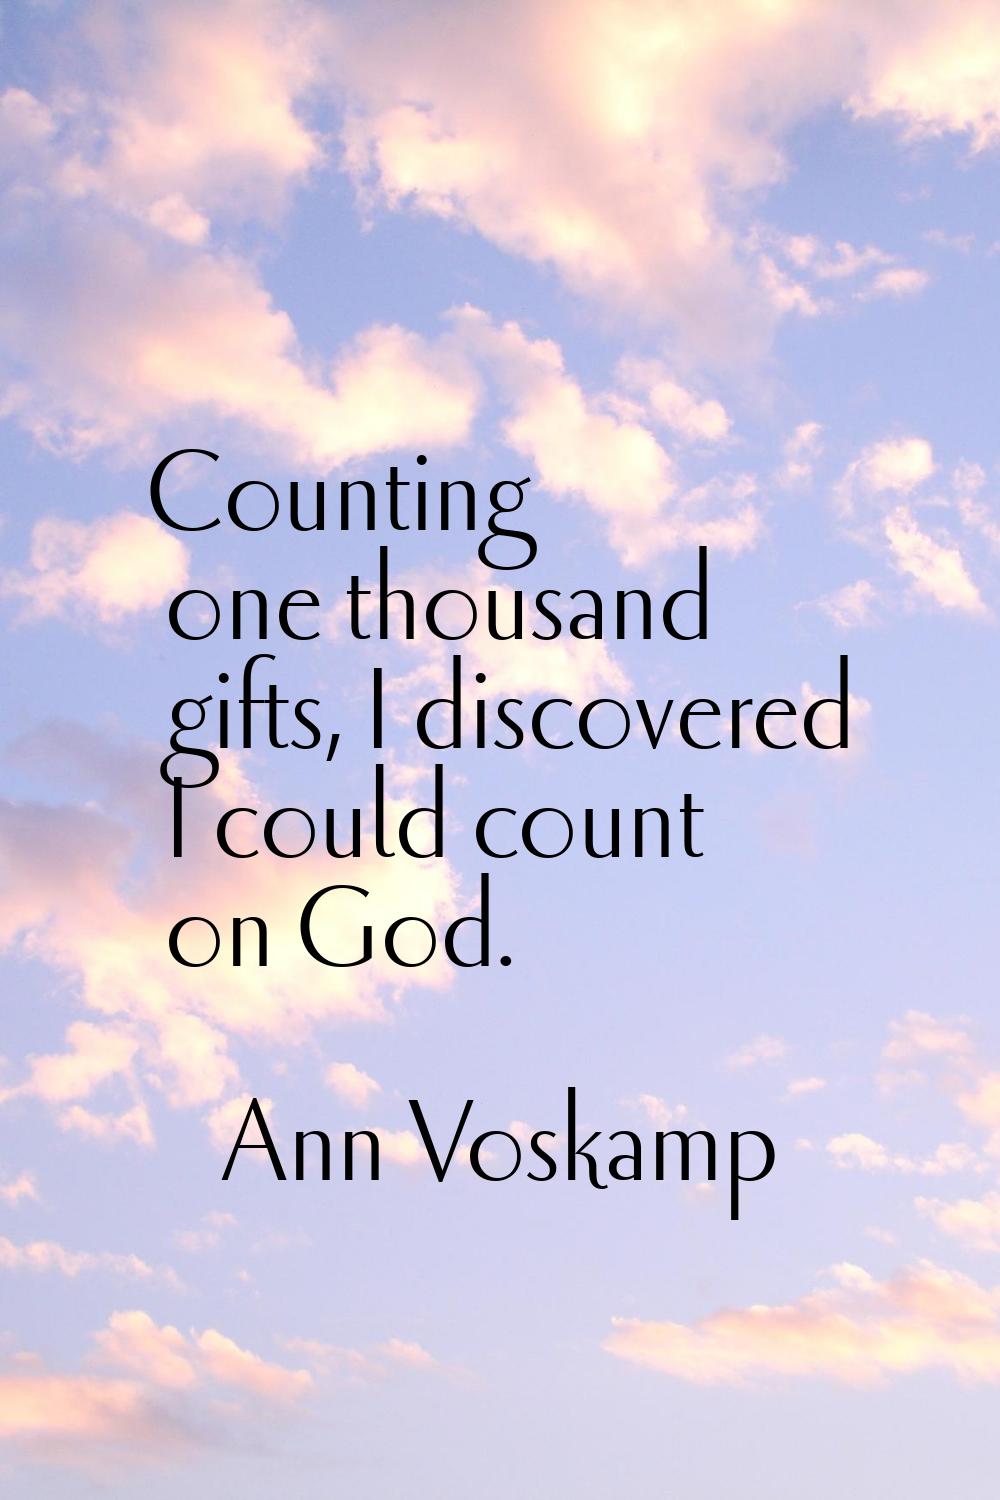 Counting one thousand gifts, I discovered I could count on God.